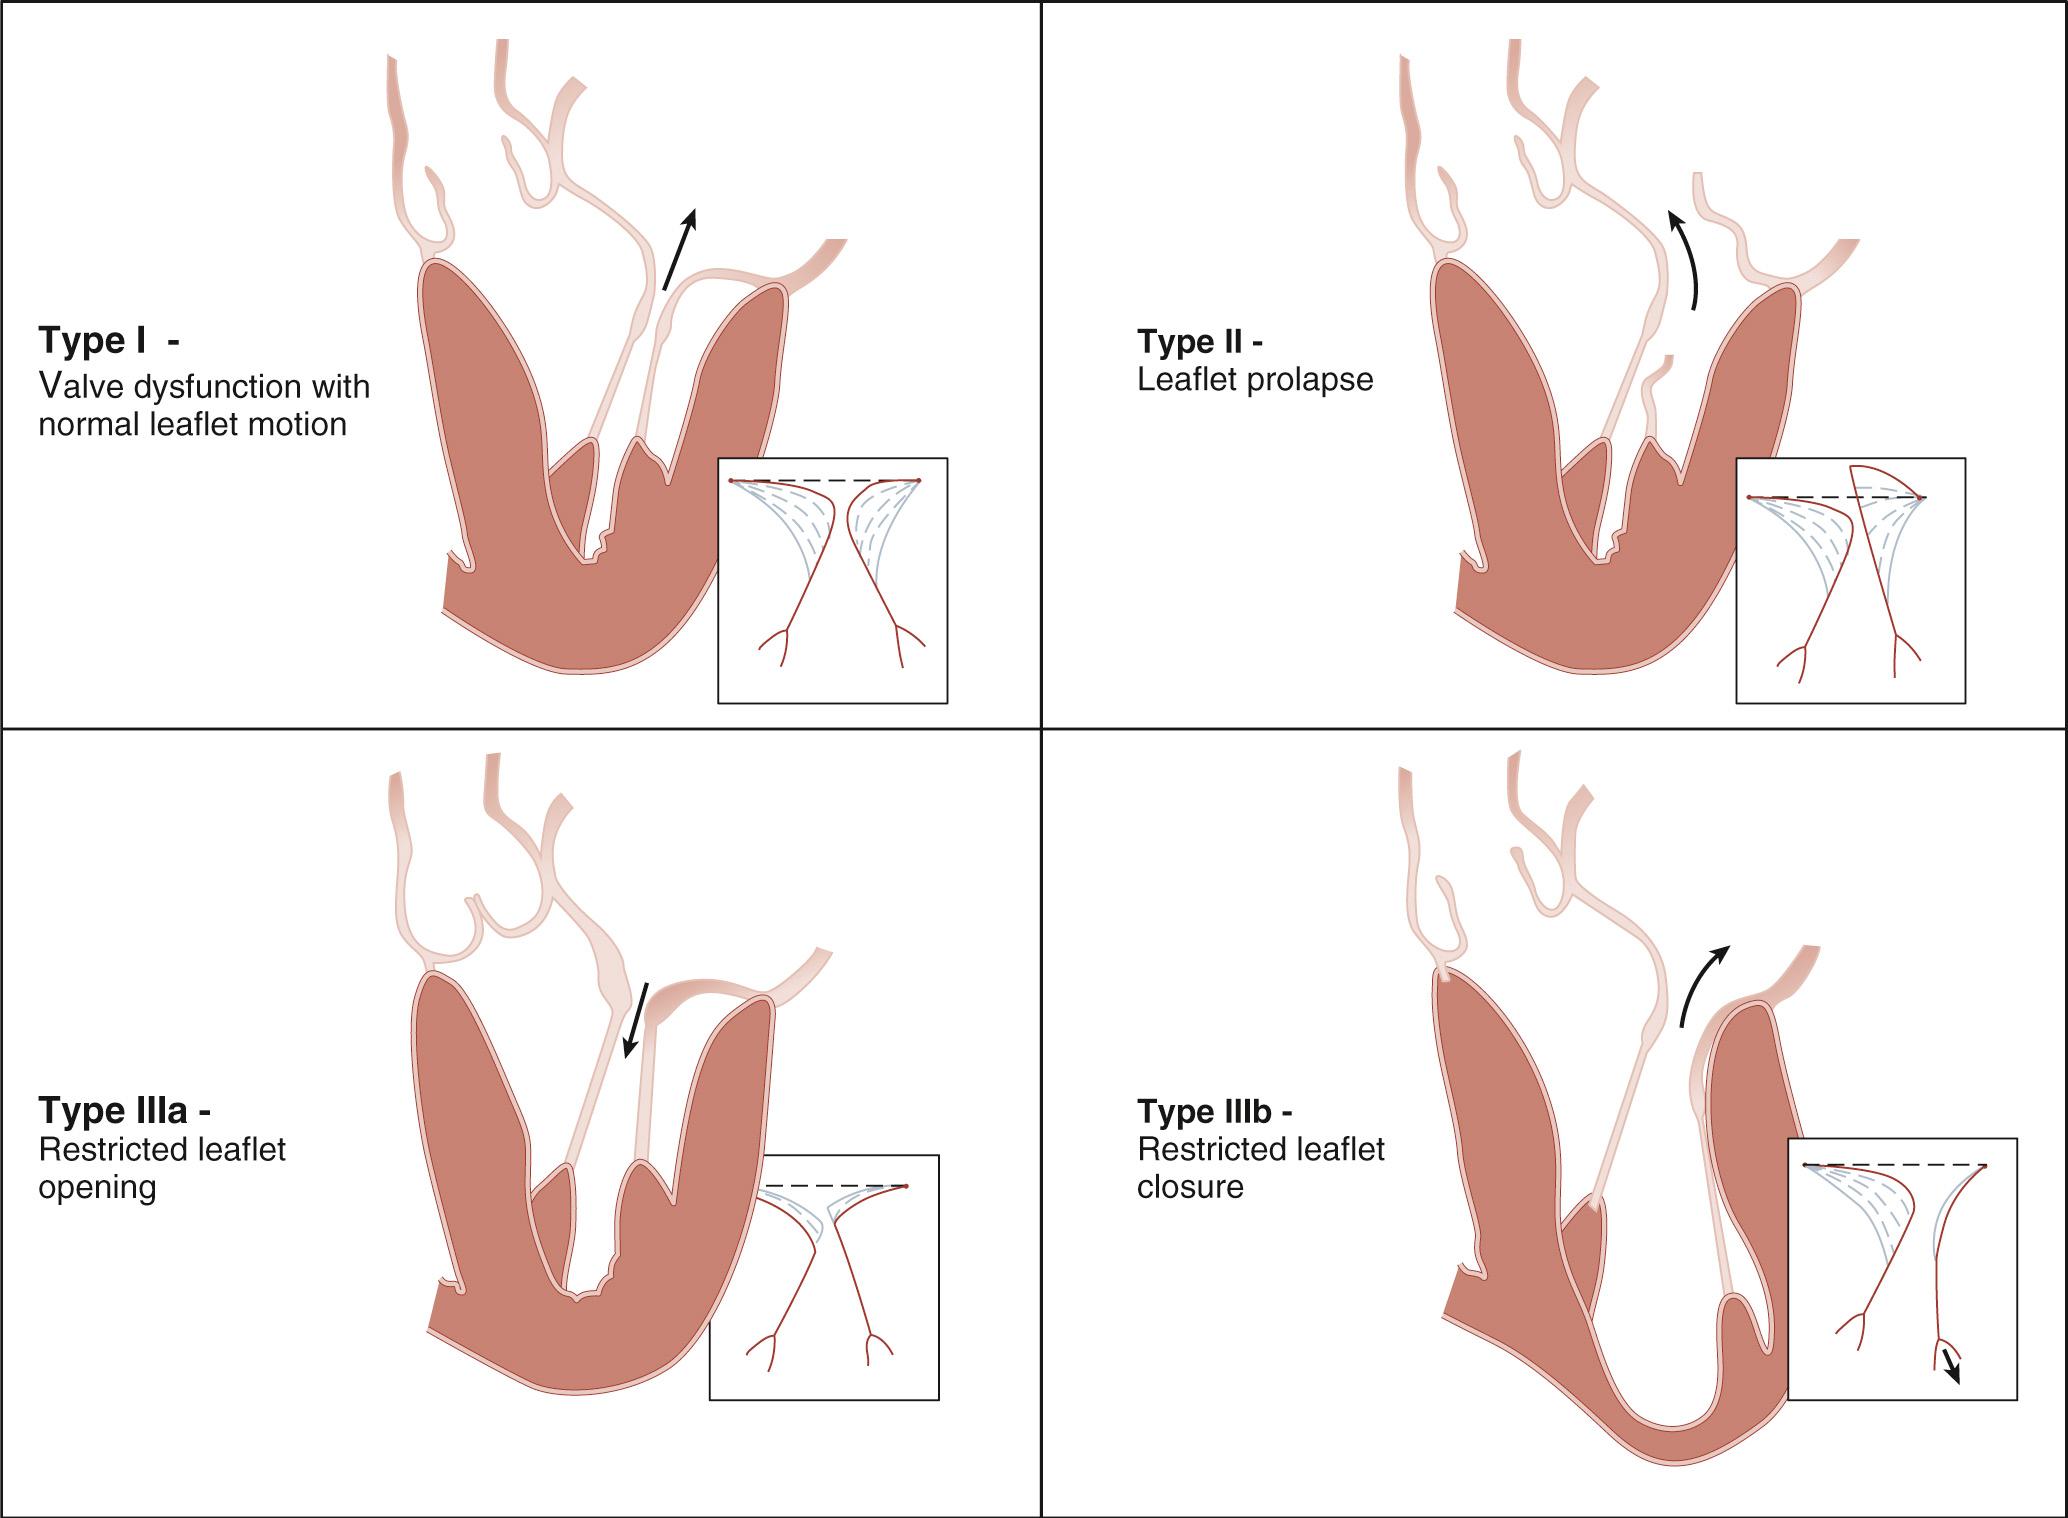 FIGURE 80-7, Carpentier's functional classification of mitral regurgitation: Type I, normal leaflet motion; Type II, increased leaflet motion resulting in prolapse; Type III, restricted leaflet motion; IIIa, during diastole and systole; IIIb, during systole only. The arrow demonstrates the direction of regurgitant flow in types I, II, and IIIb. In type IIIa, the arrow demonstrates the frequent association with coexistent mitral stenosis.